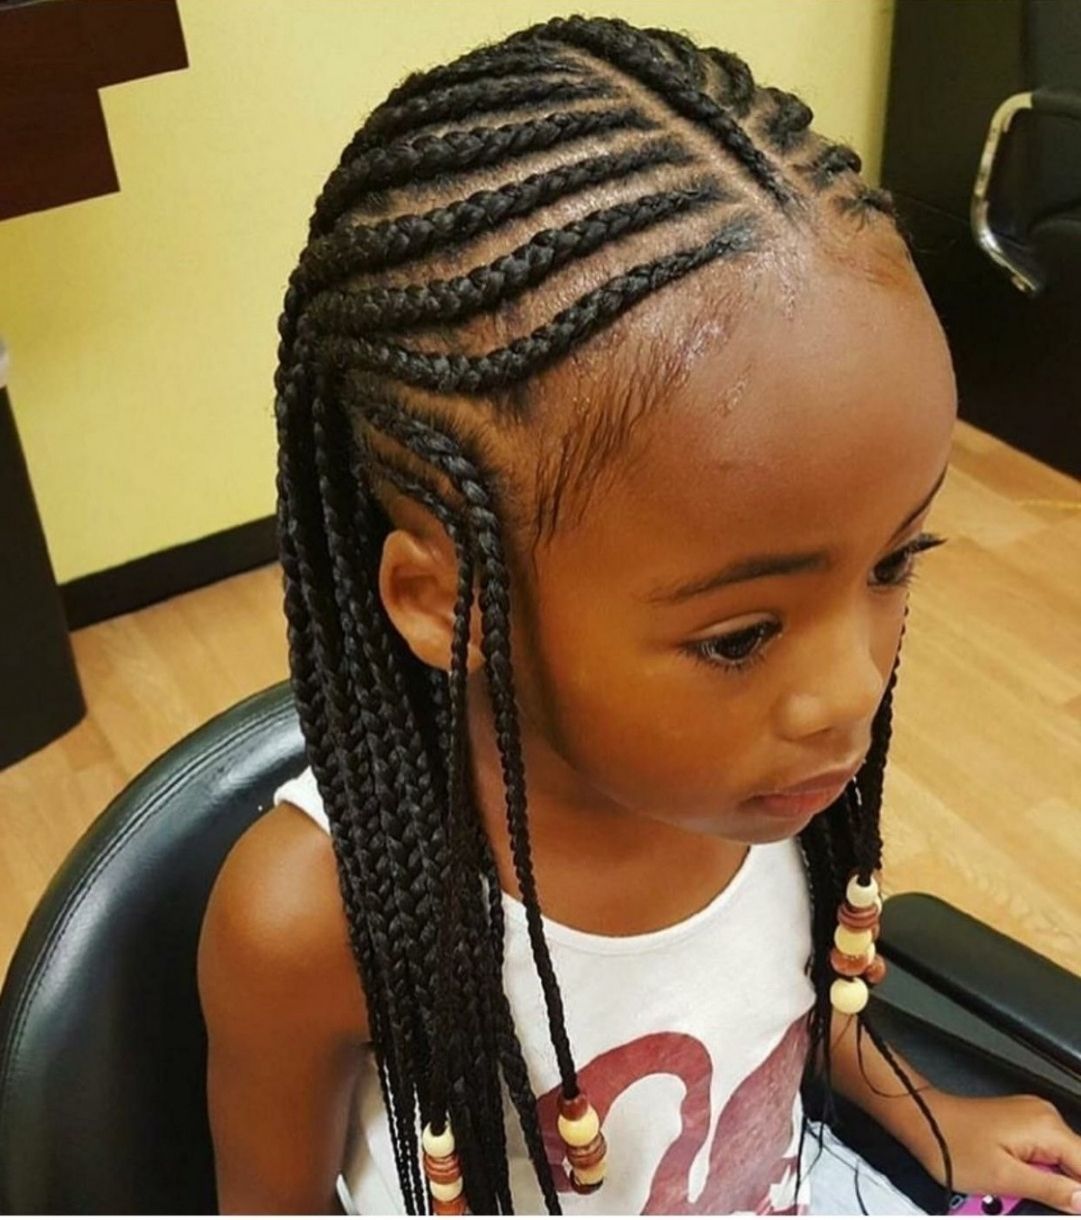 37 Doubts About Braid Hairstyles For Kids You Should Inside Cute With 2017 Cute Braided Hairstyles (View 15 of 15)